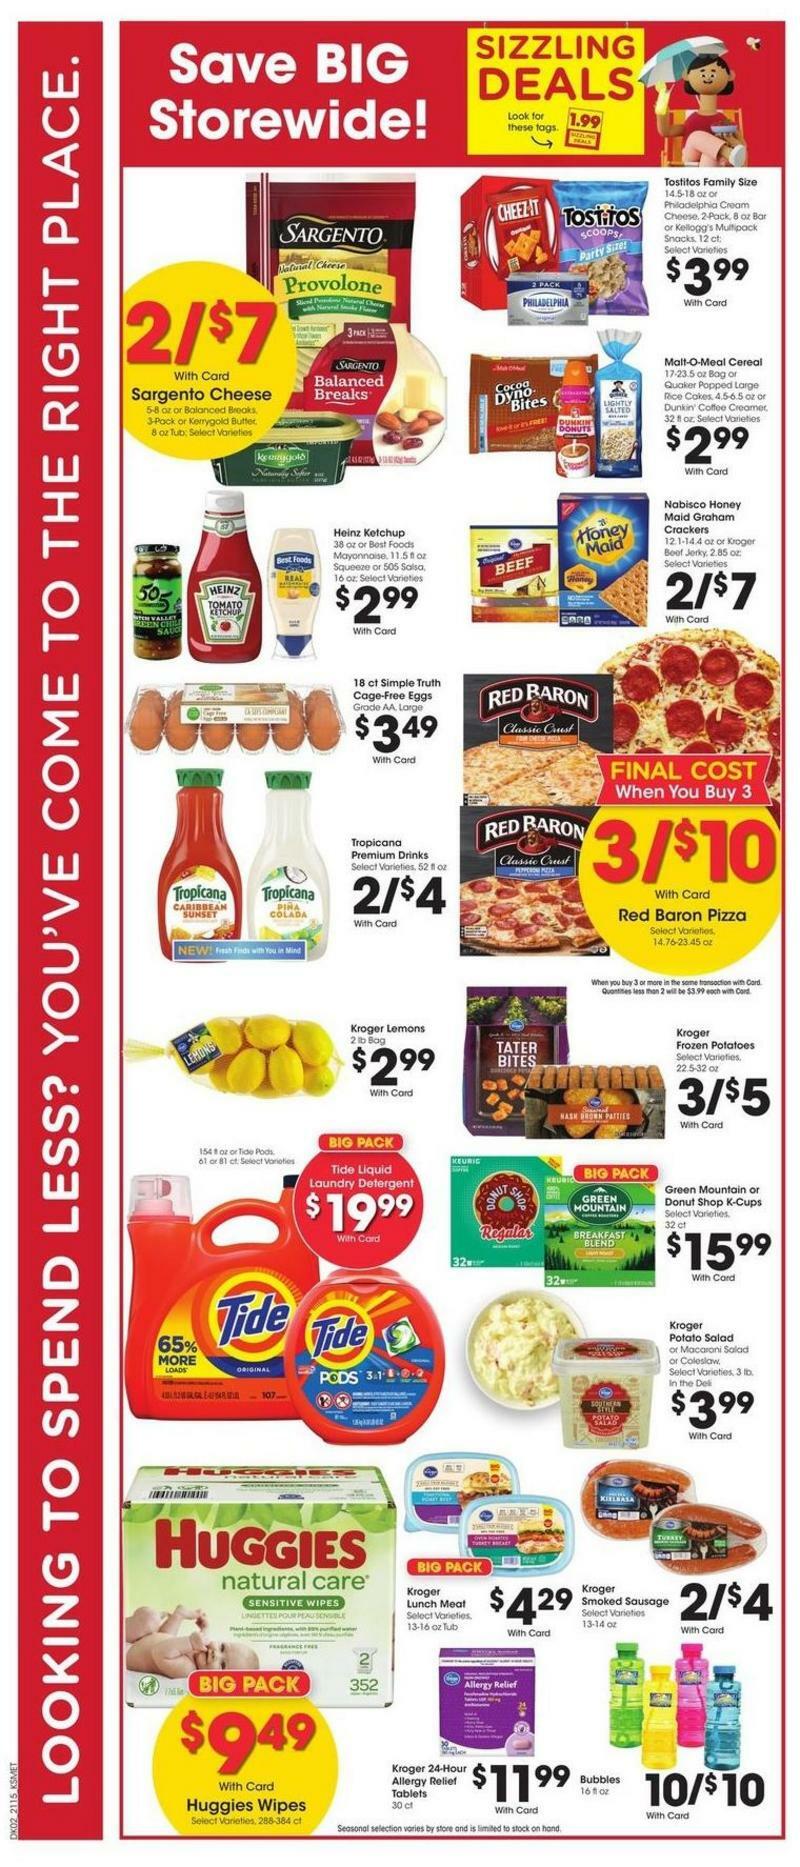 City Market Weekly Ads & Special Buys from May 12 - Page 4